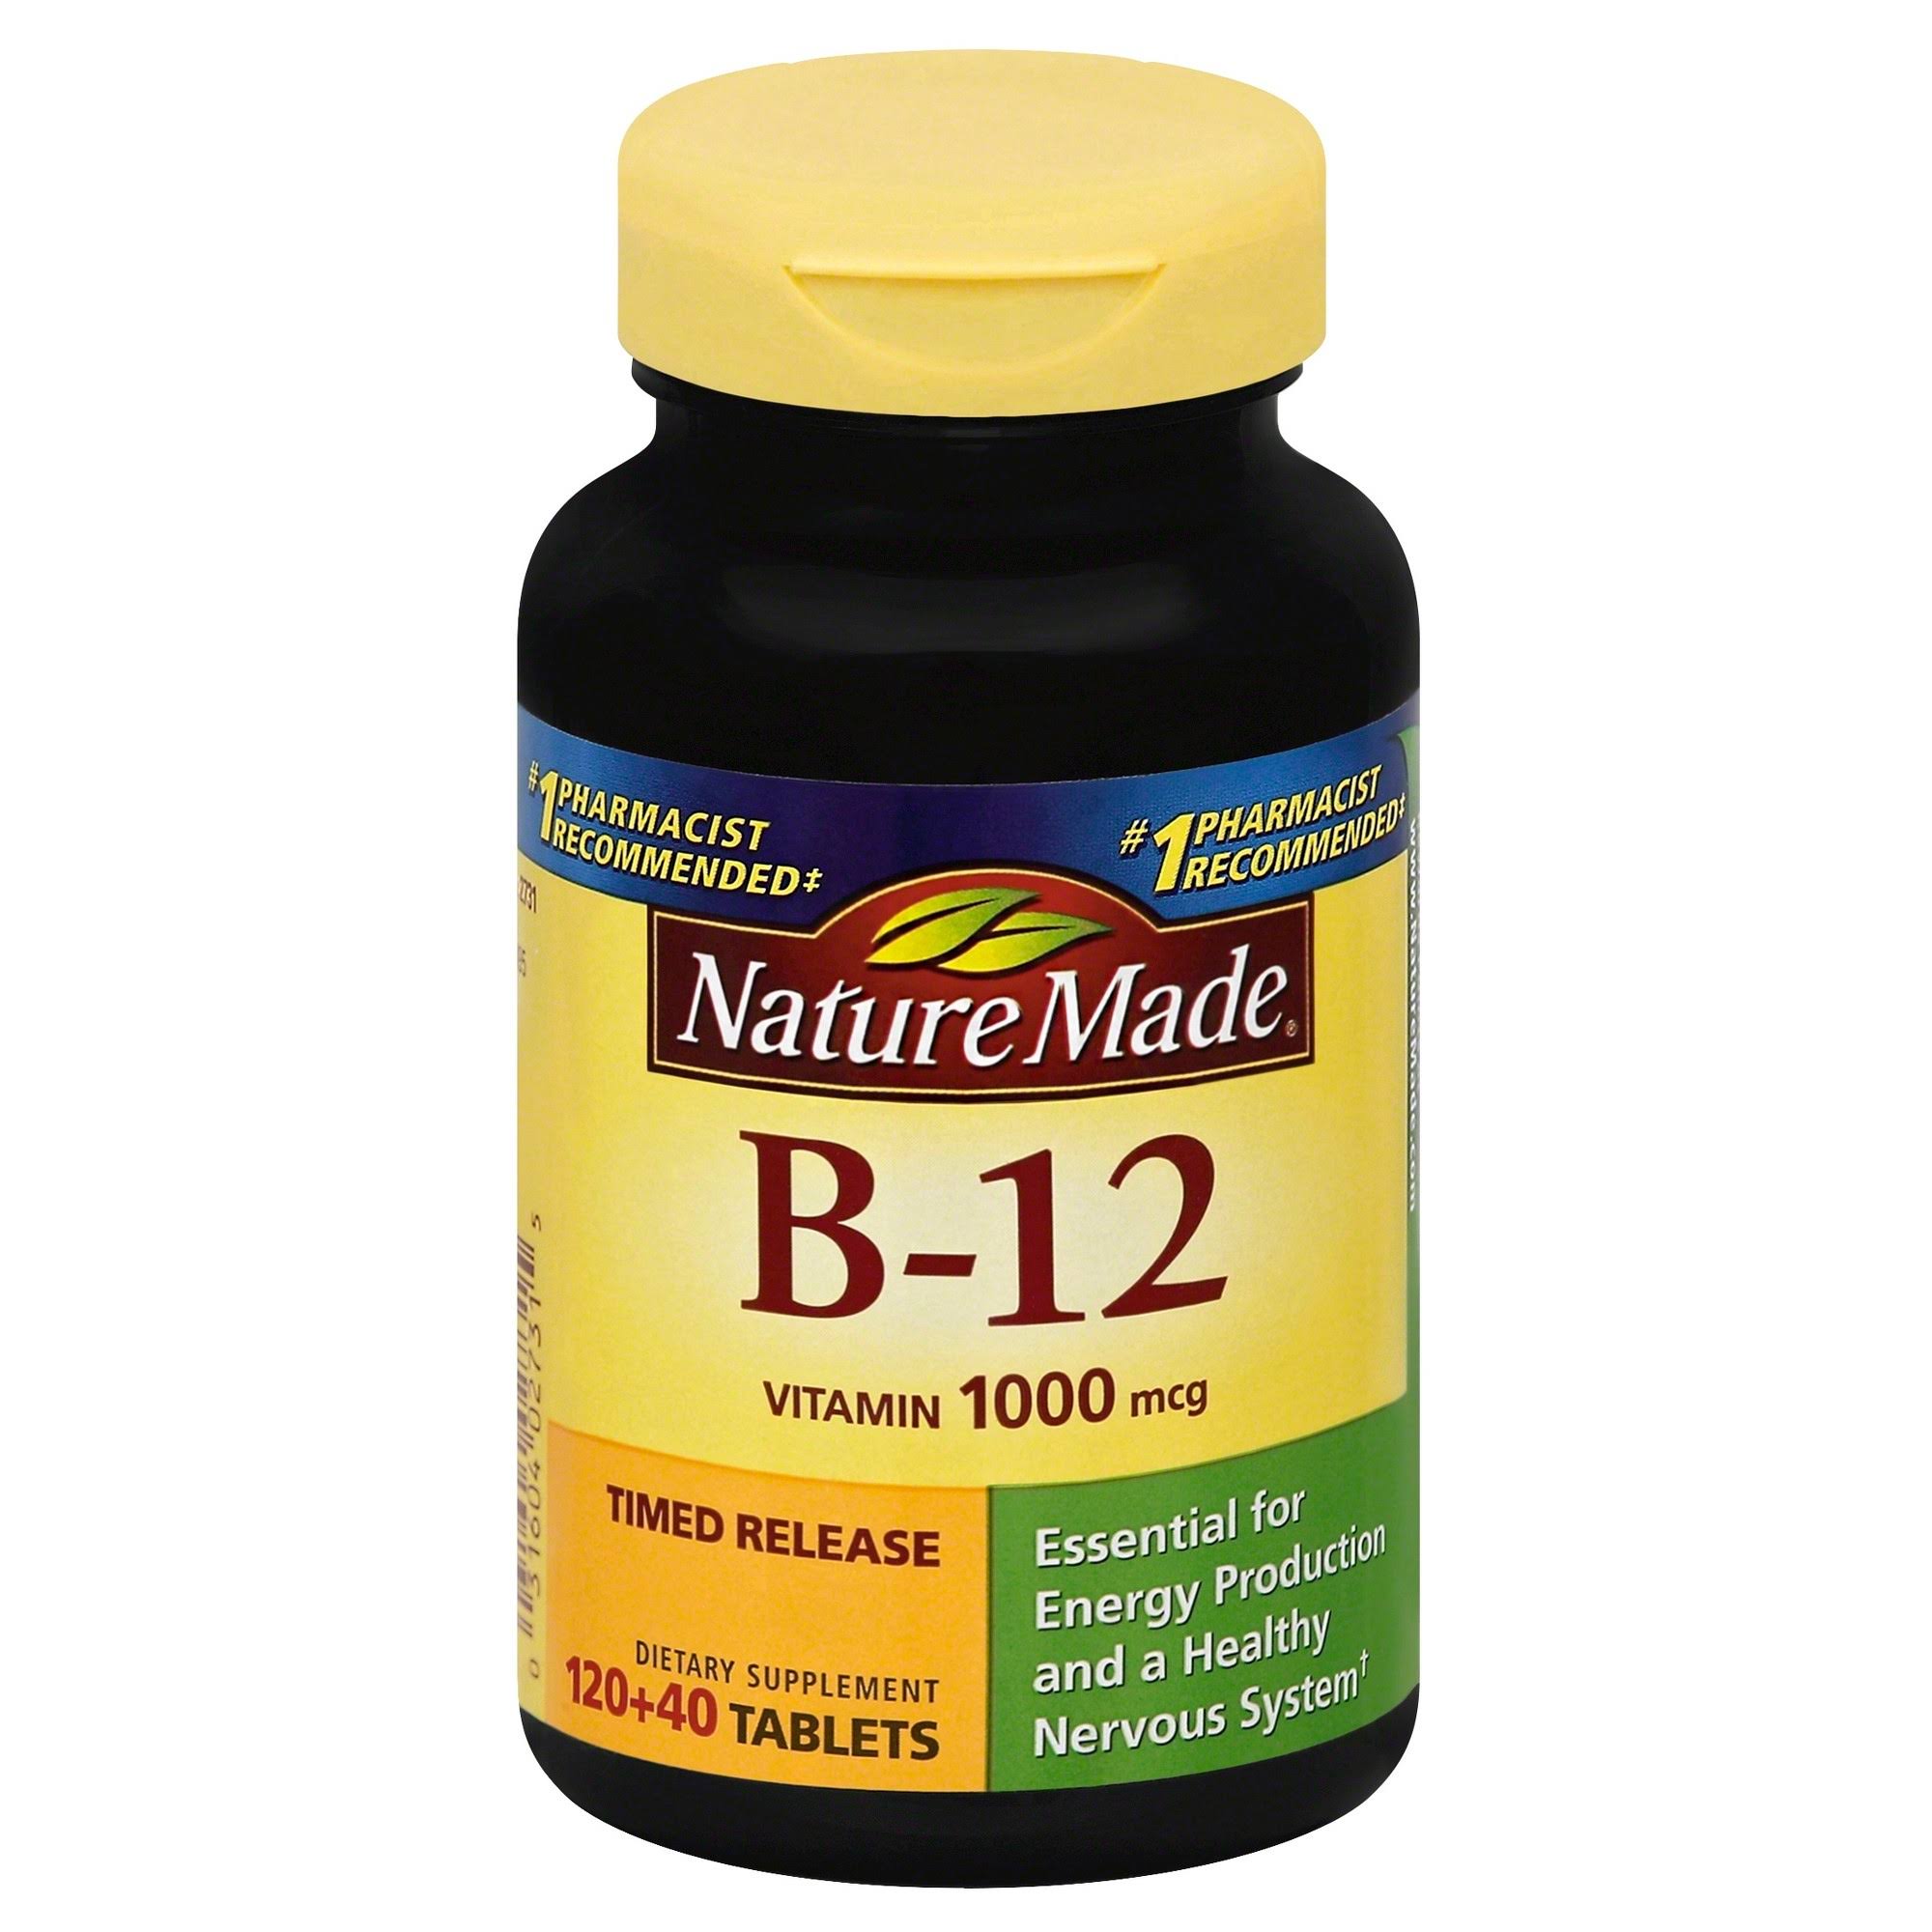 Nature Made Vitamin B-12 Timed Release Tablet Supplement - 160ct